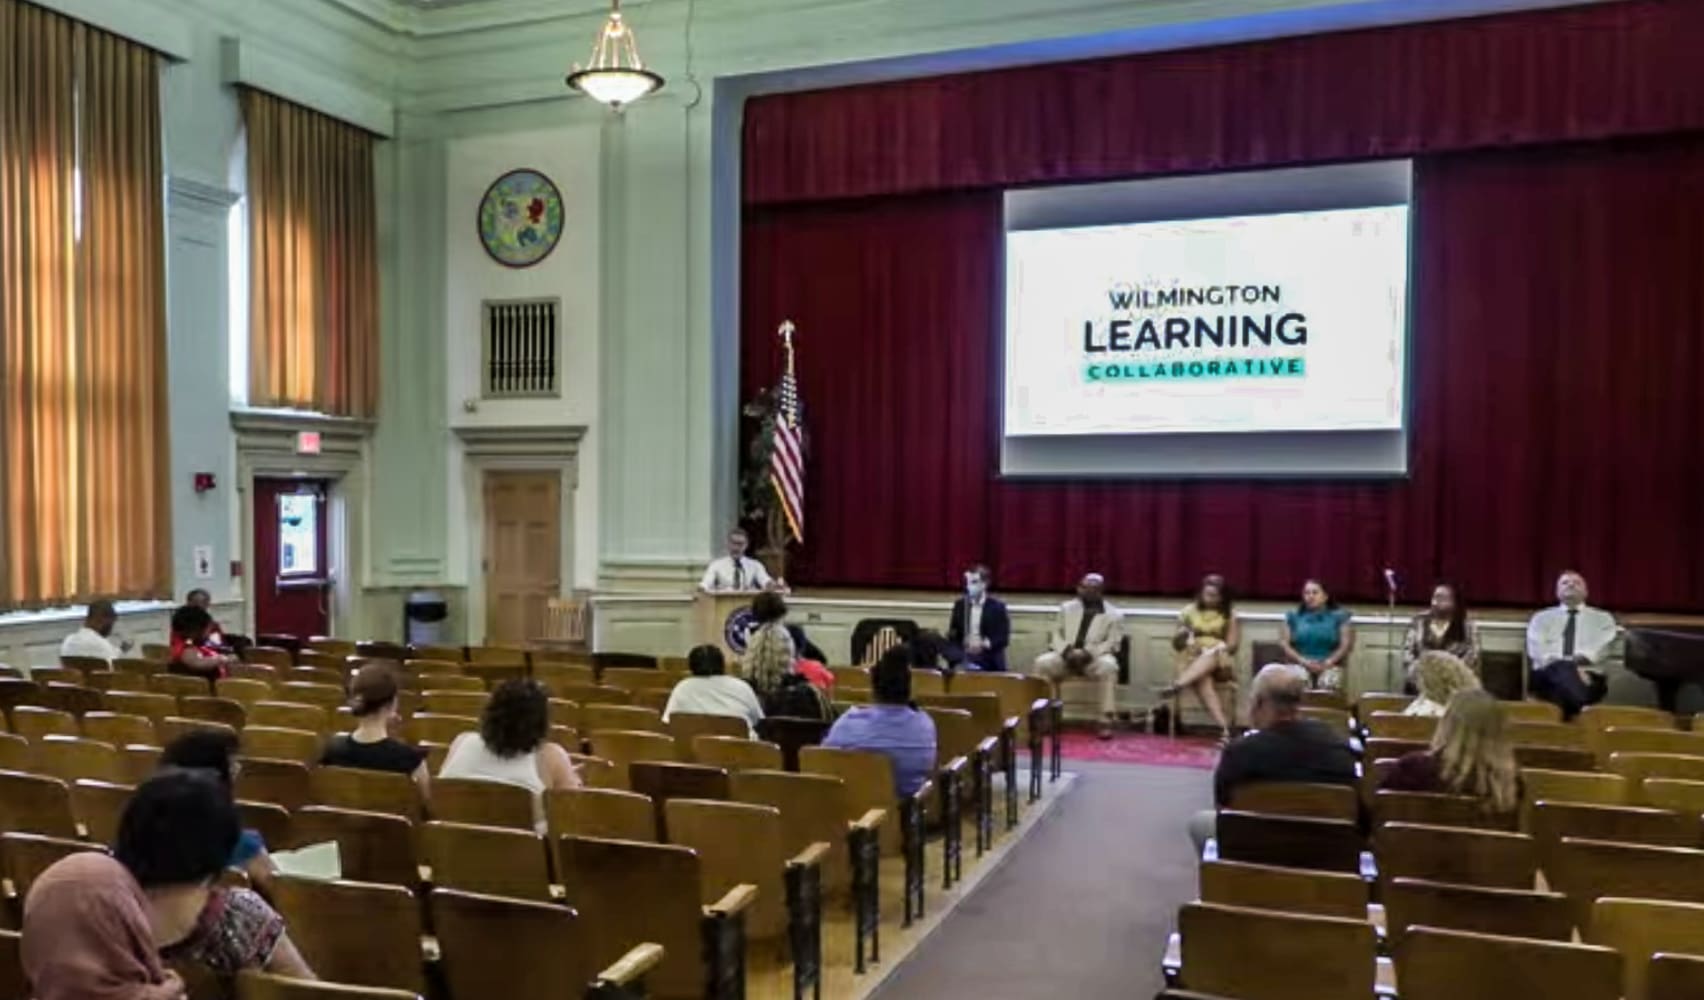 Featured image for “Ed. officials field community’s Learning Collaborative questions”